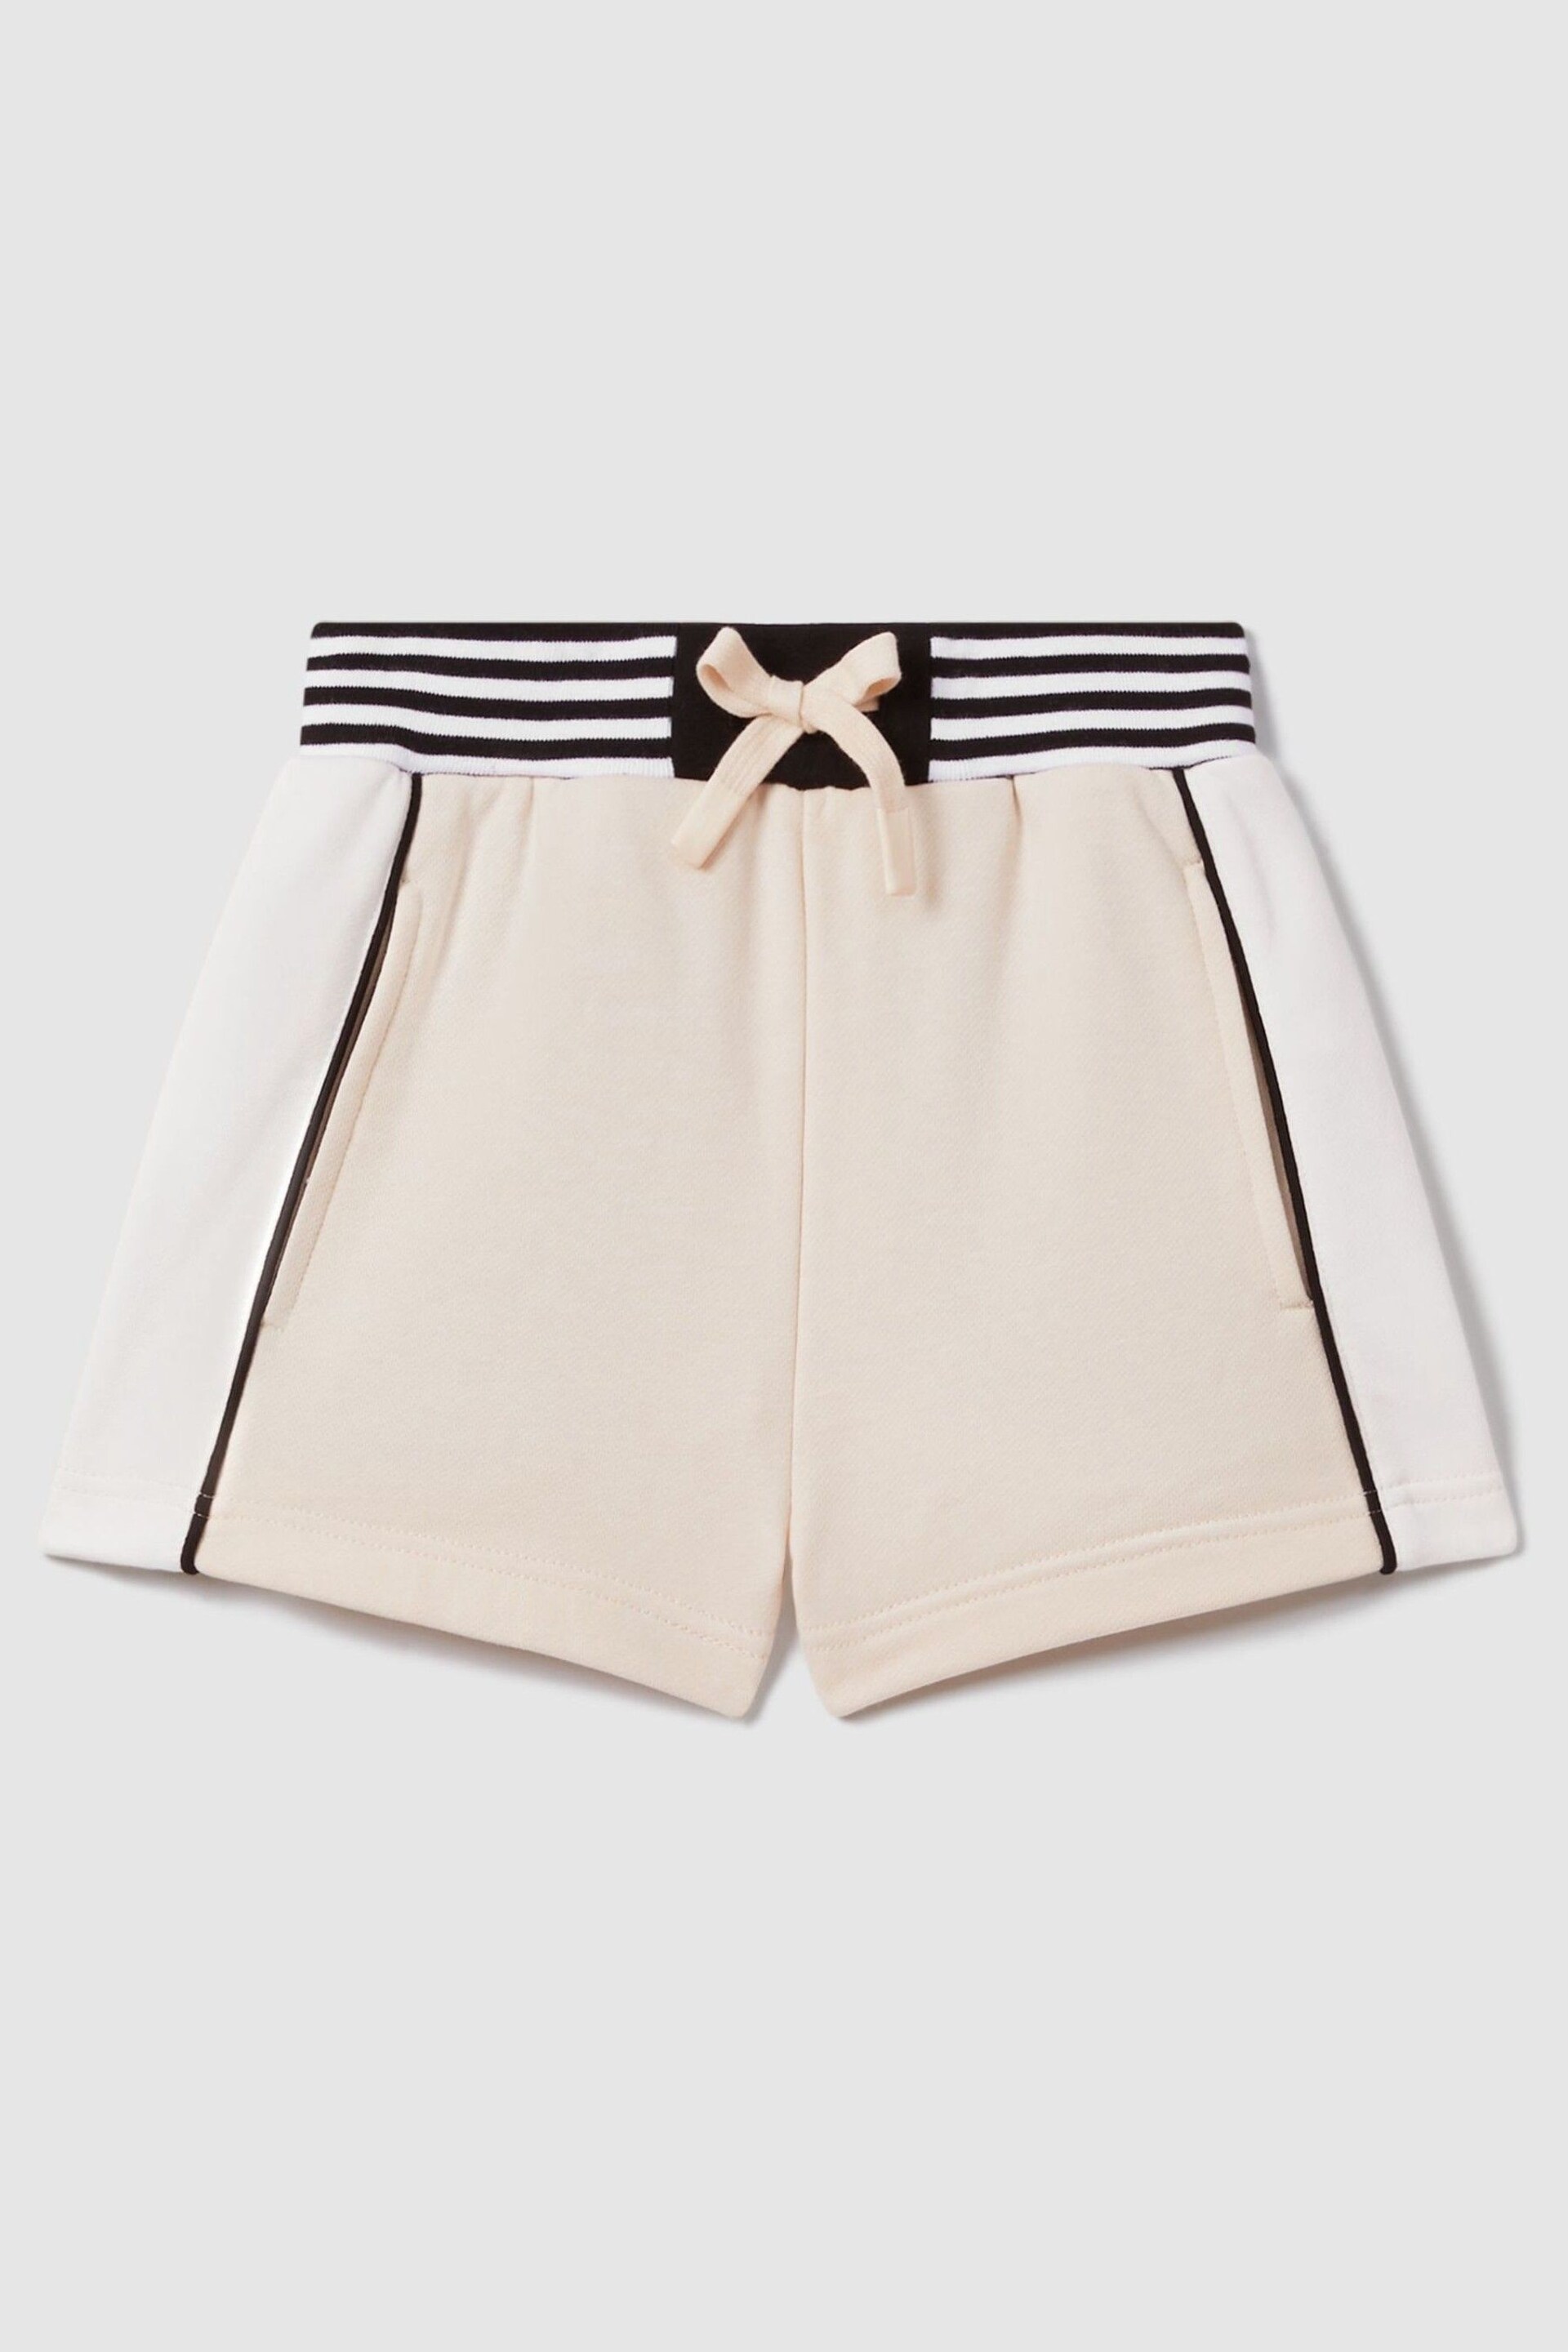 Reiss Ivory Colette Teen Cotton Blend Elasticated Waist Shorts - Image 1 of 4